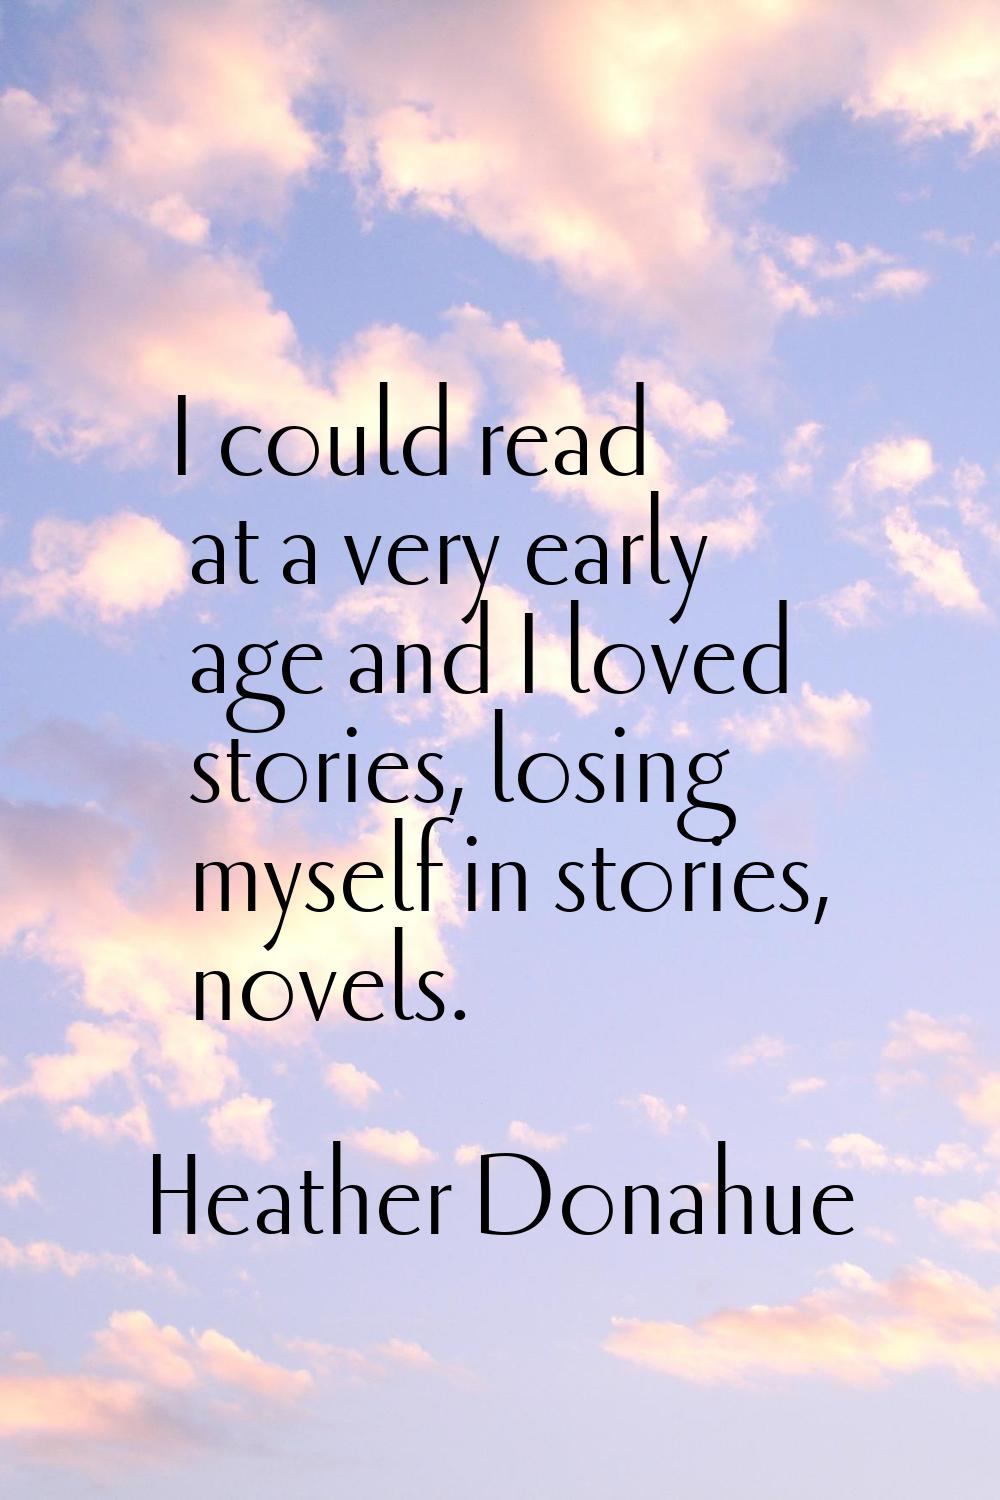 I could read at a very early age and I loved stories, losing myself in stories, novels.